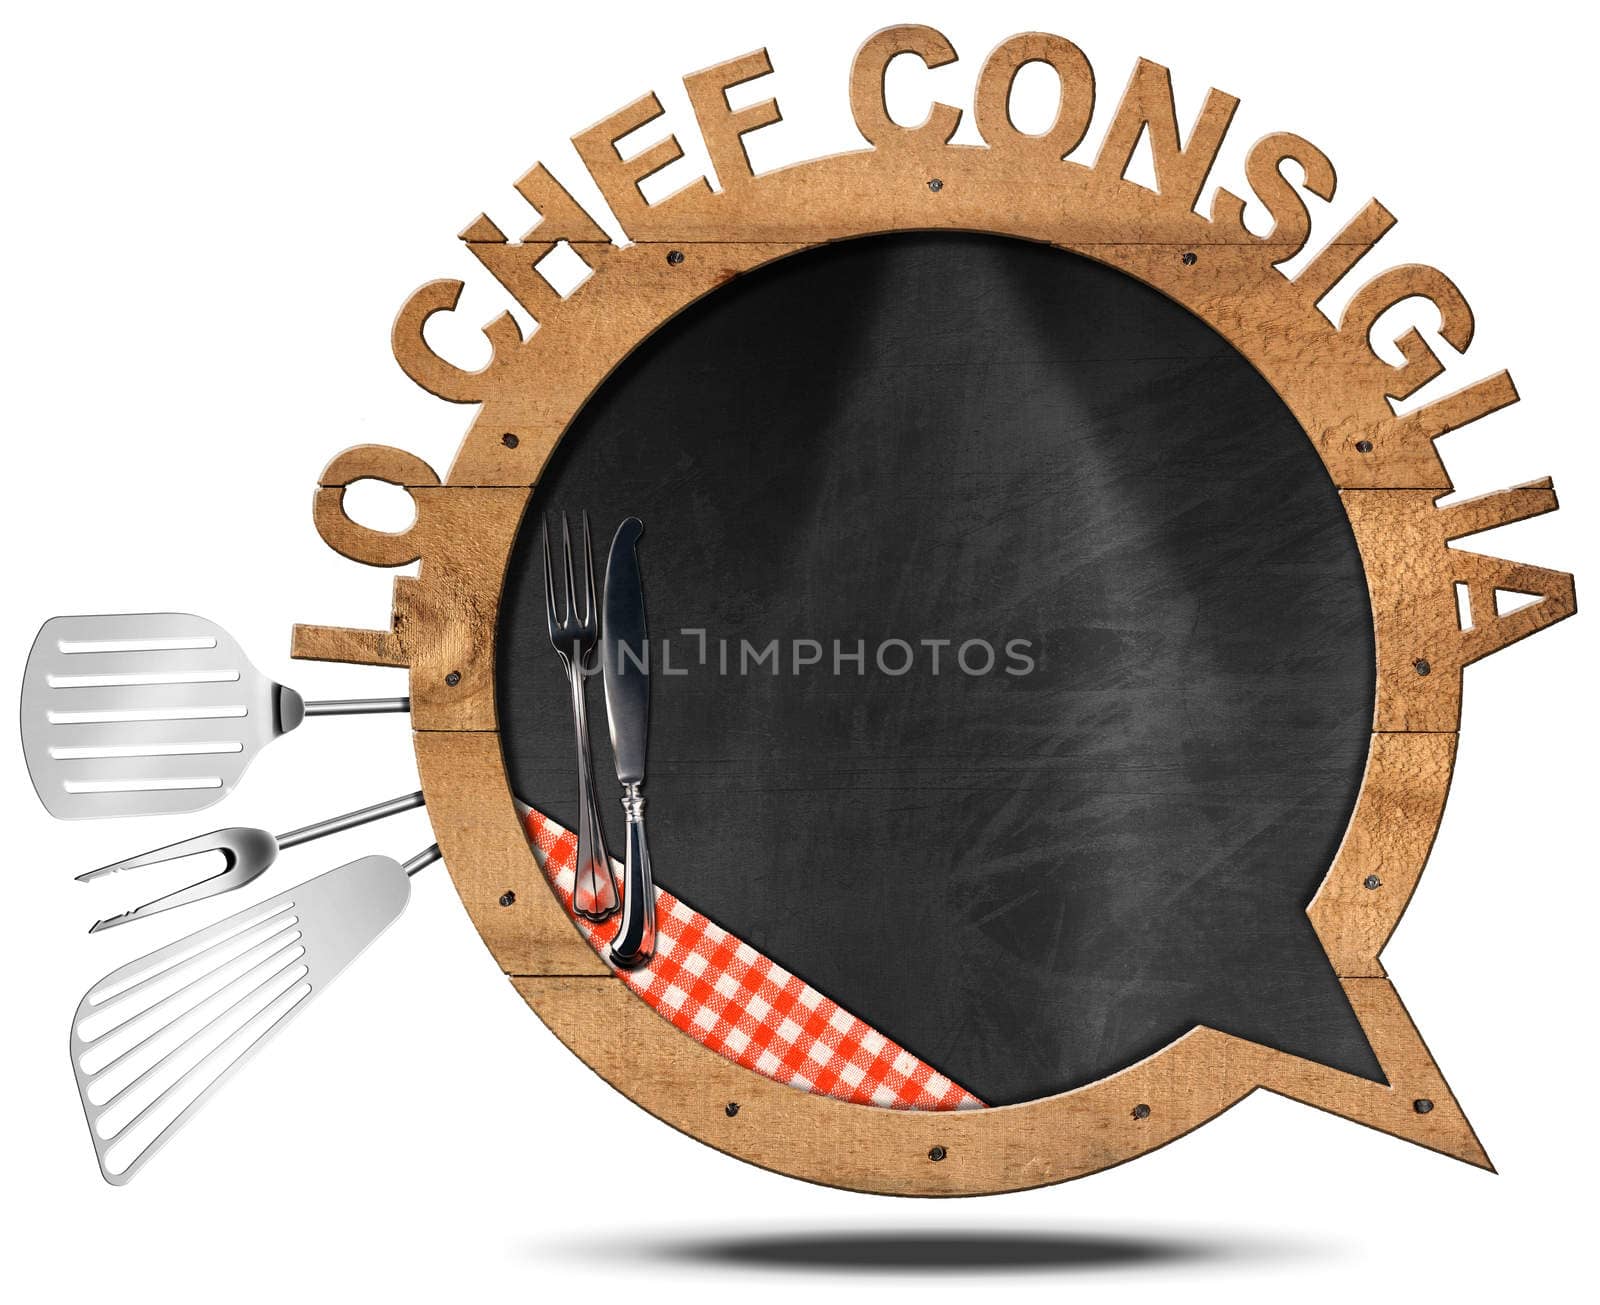 Blackboard in the shape of speech bubble with text Lo chef consiglia (The chef recommends) in italian language. Isolated on white background